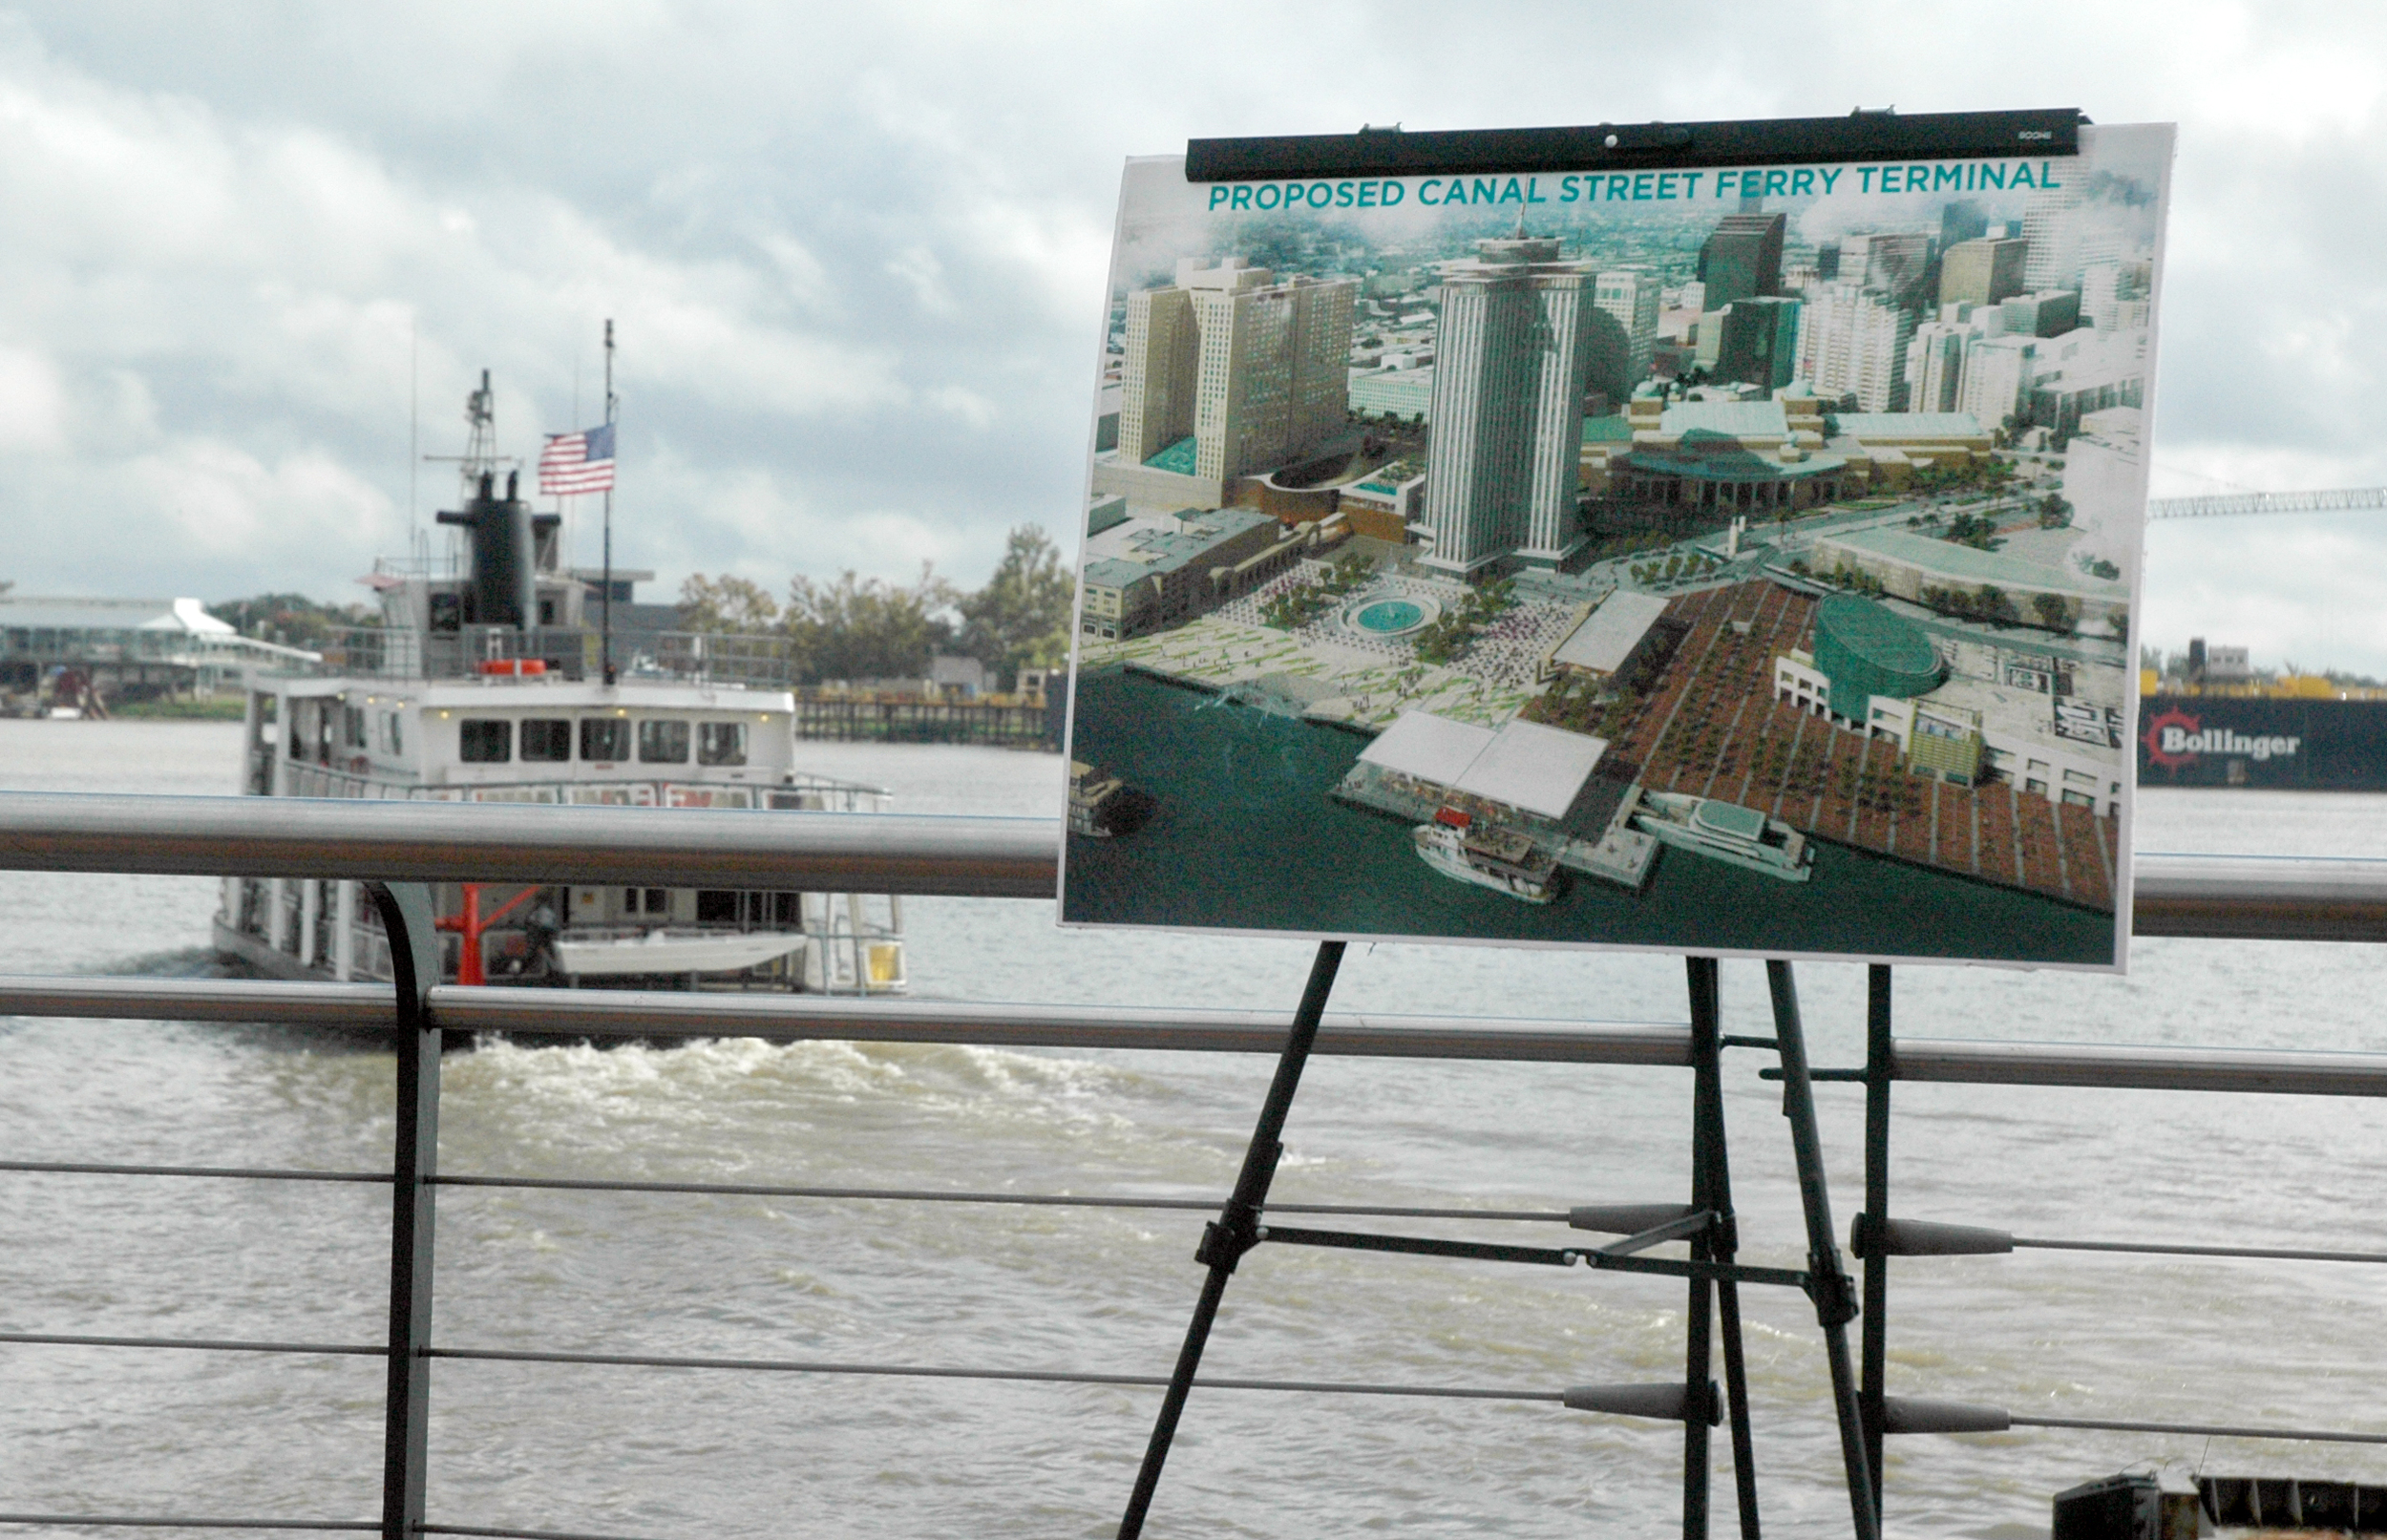  The proposed new Canal Street Ferry Terminal project will include a double ferry dock, new ferry terminal, streetcar access to the convention center, bus bay access and an expanded RTA bus fleet. 